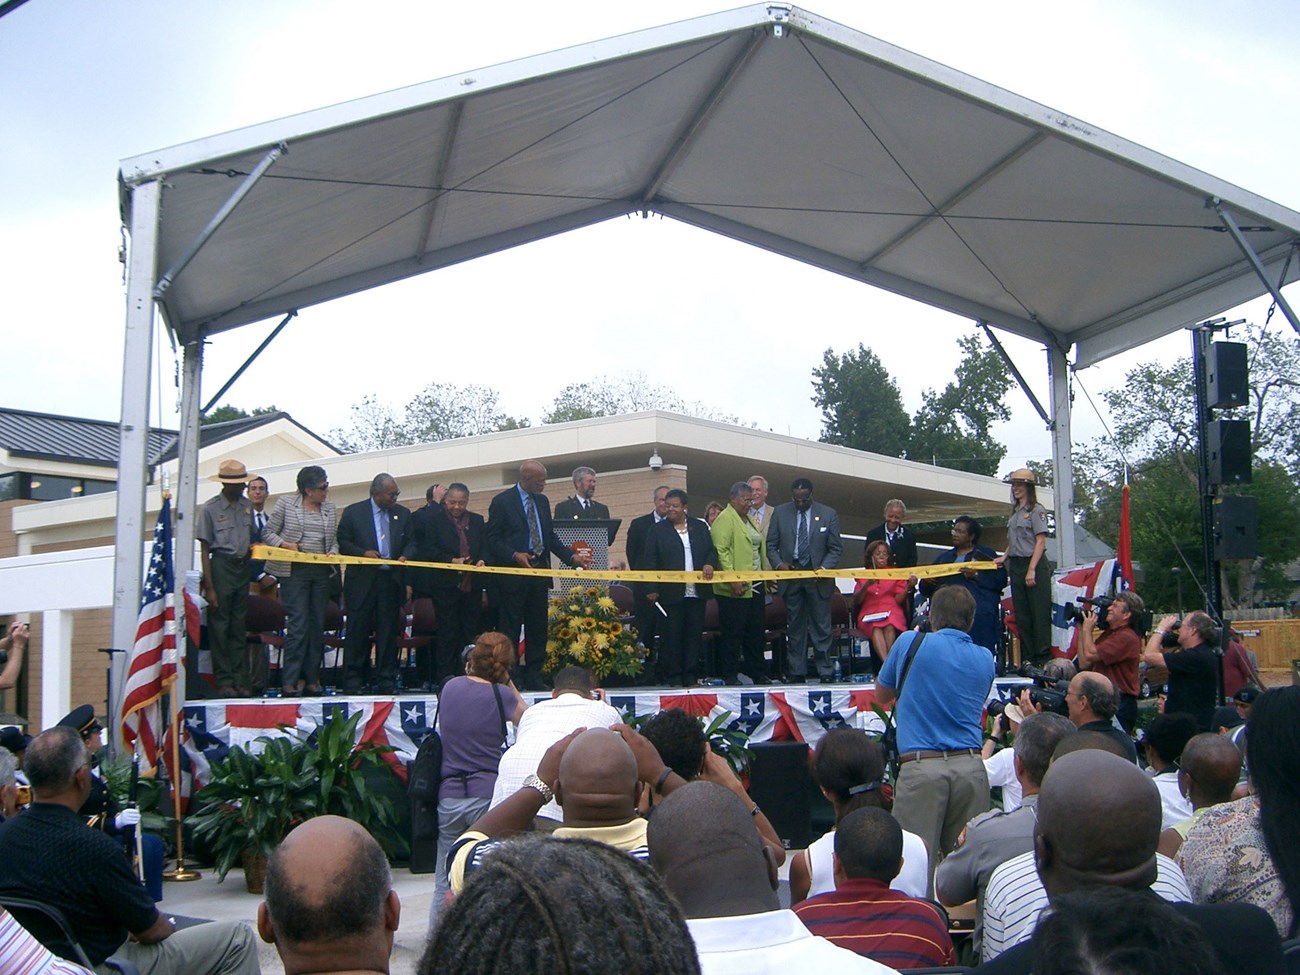 Members of the Little Rock Nine prepare to cut the ribbon during the dedication ceremony, September 24, 2007.